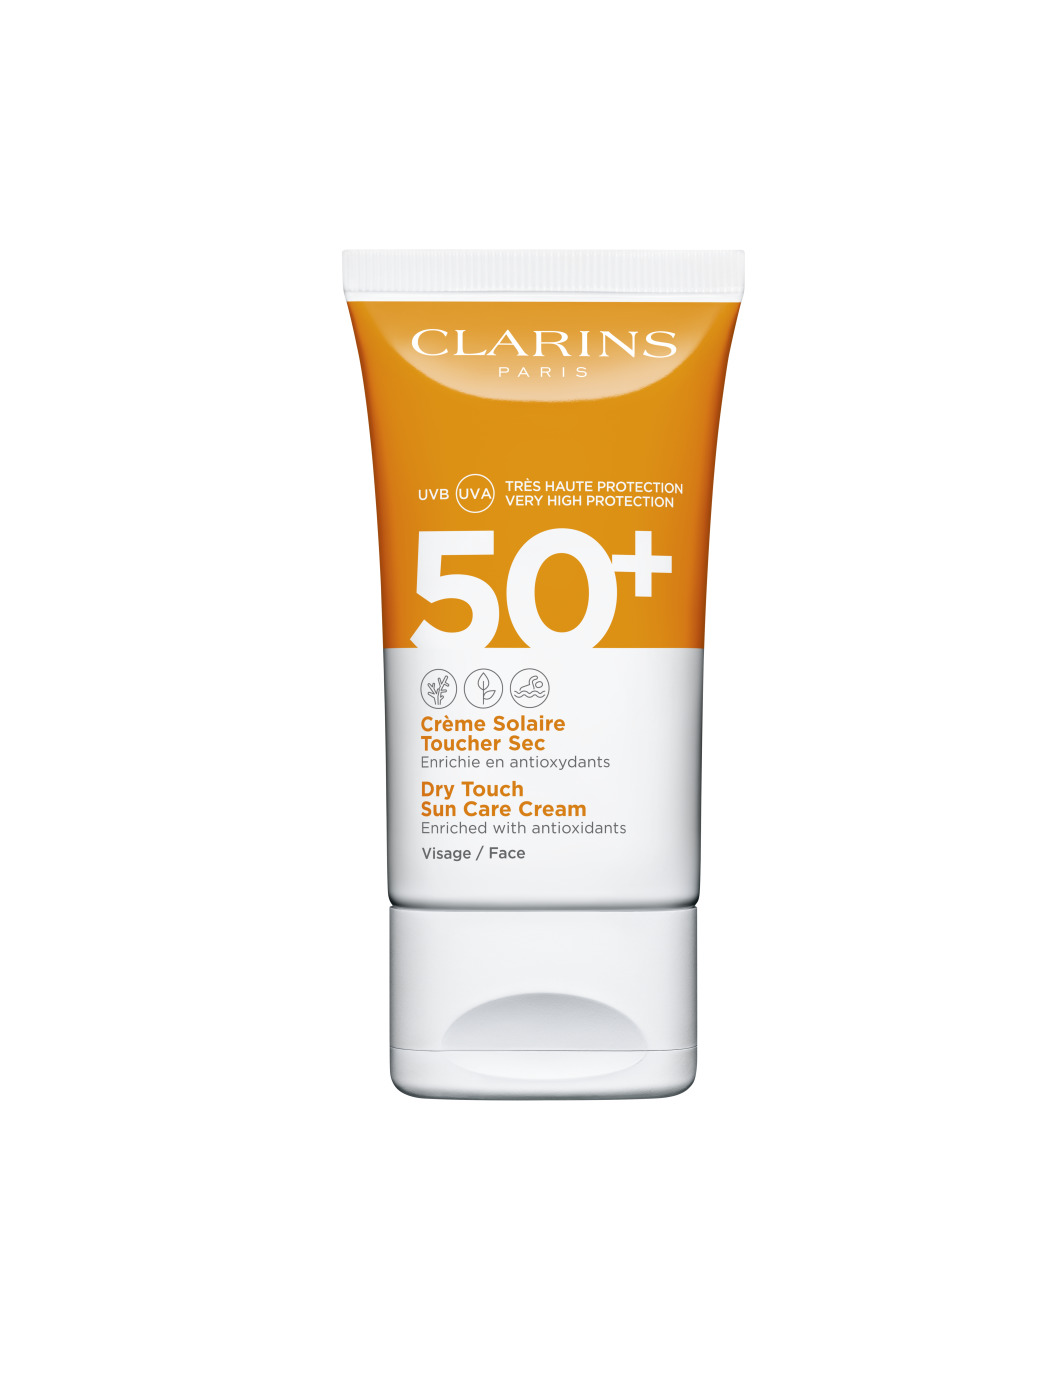 Clarins Dry Touch Face Suncare UVB UVA 30 or 50